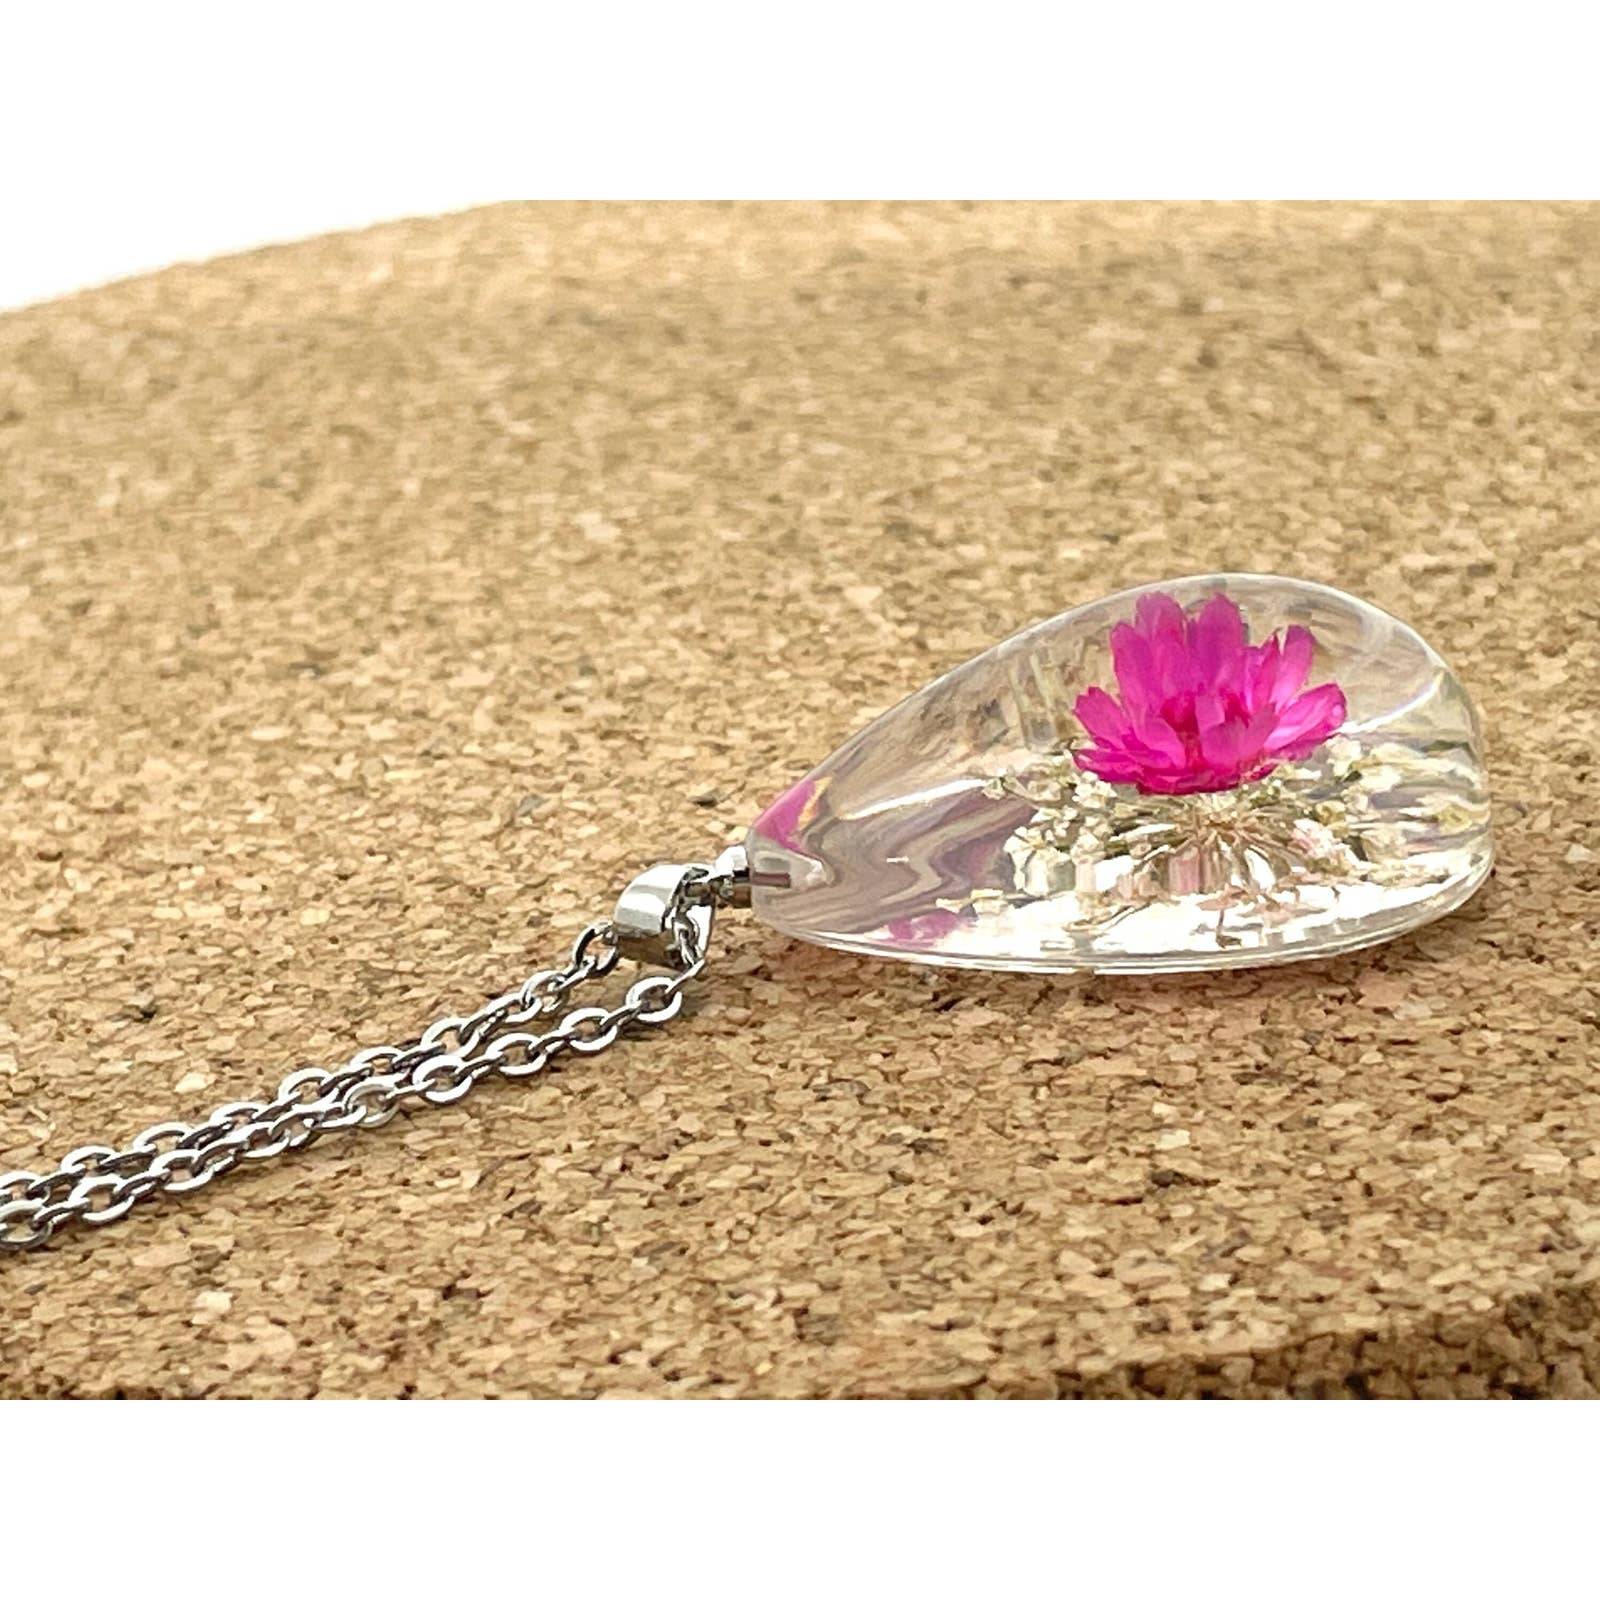 Pressed Flower Necklace - Dried Flower Jewelry - Real Flower Necklace